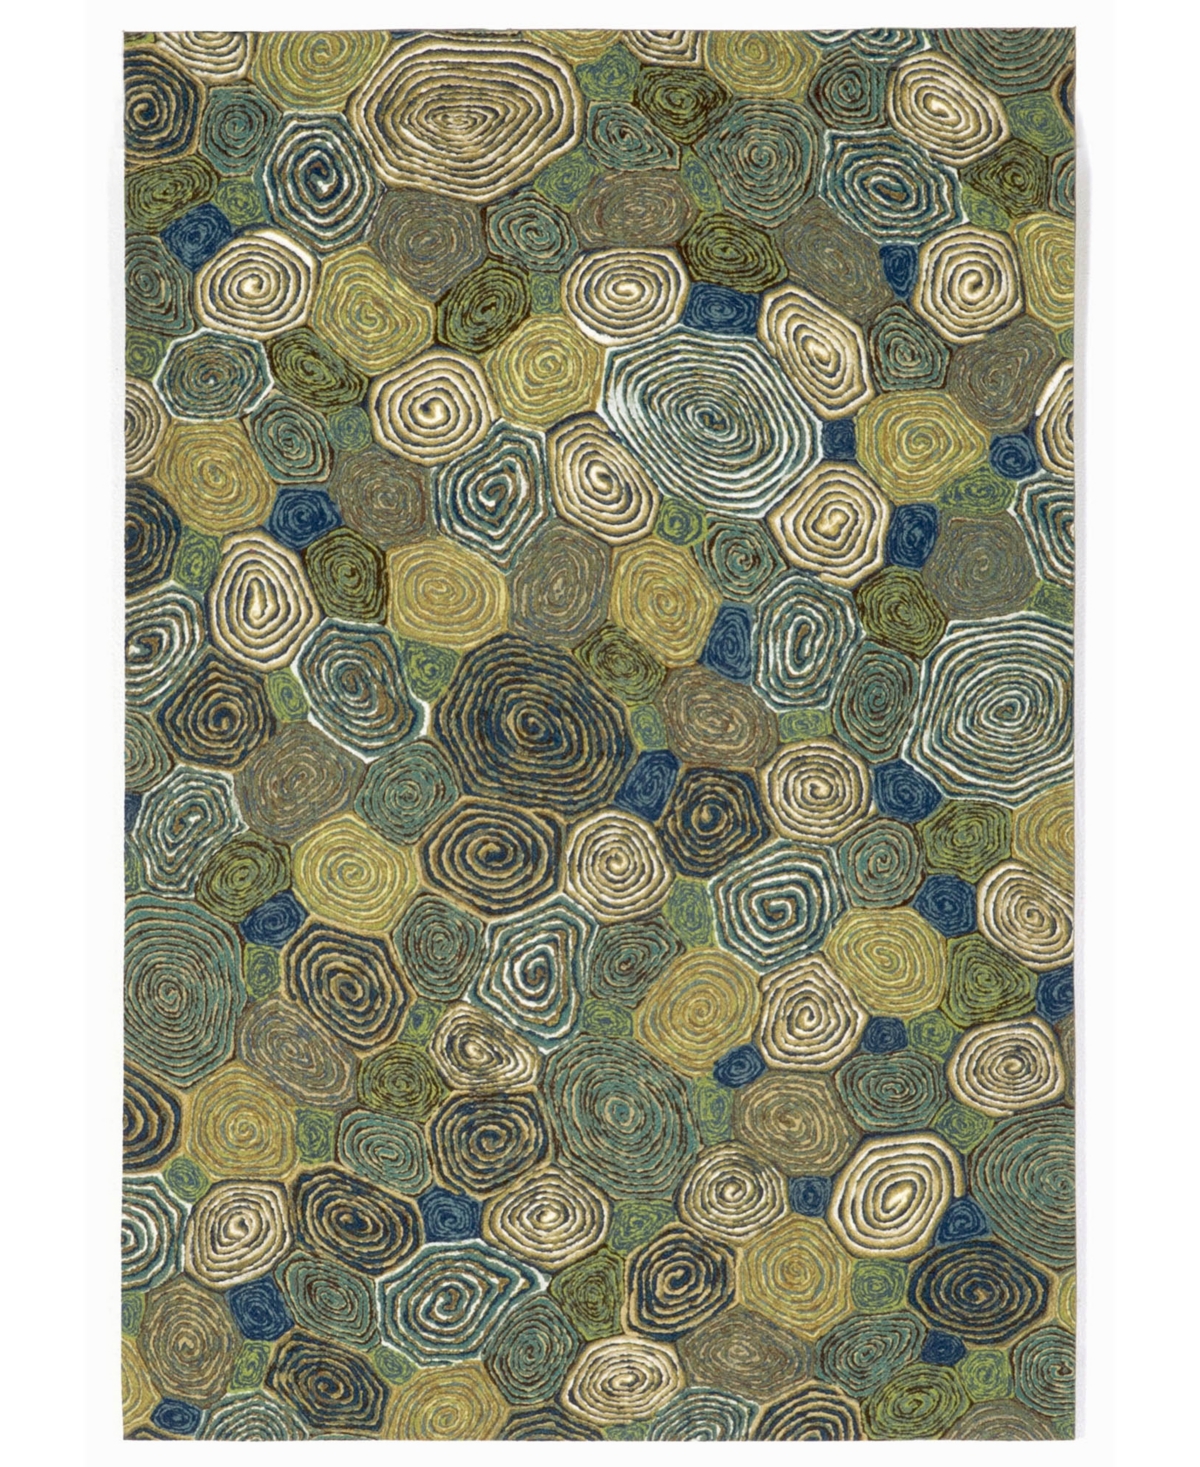 Liora Manne Visions Iii Giant Swirls 2' X 3' Outdoor Area Rug In Green